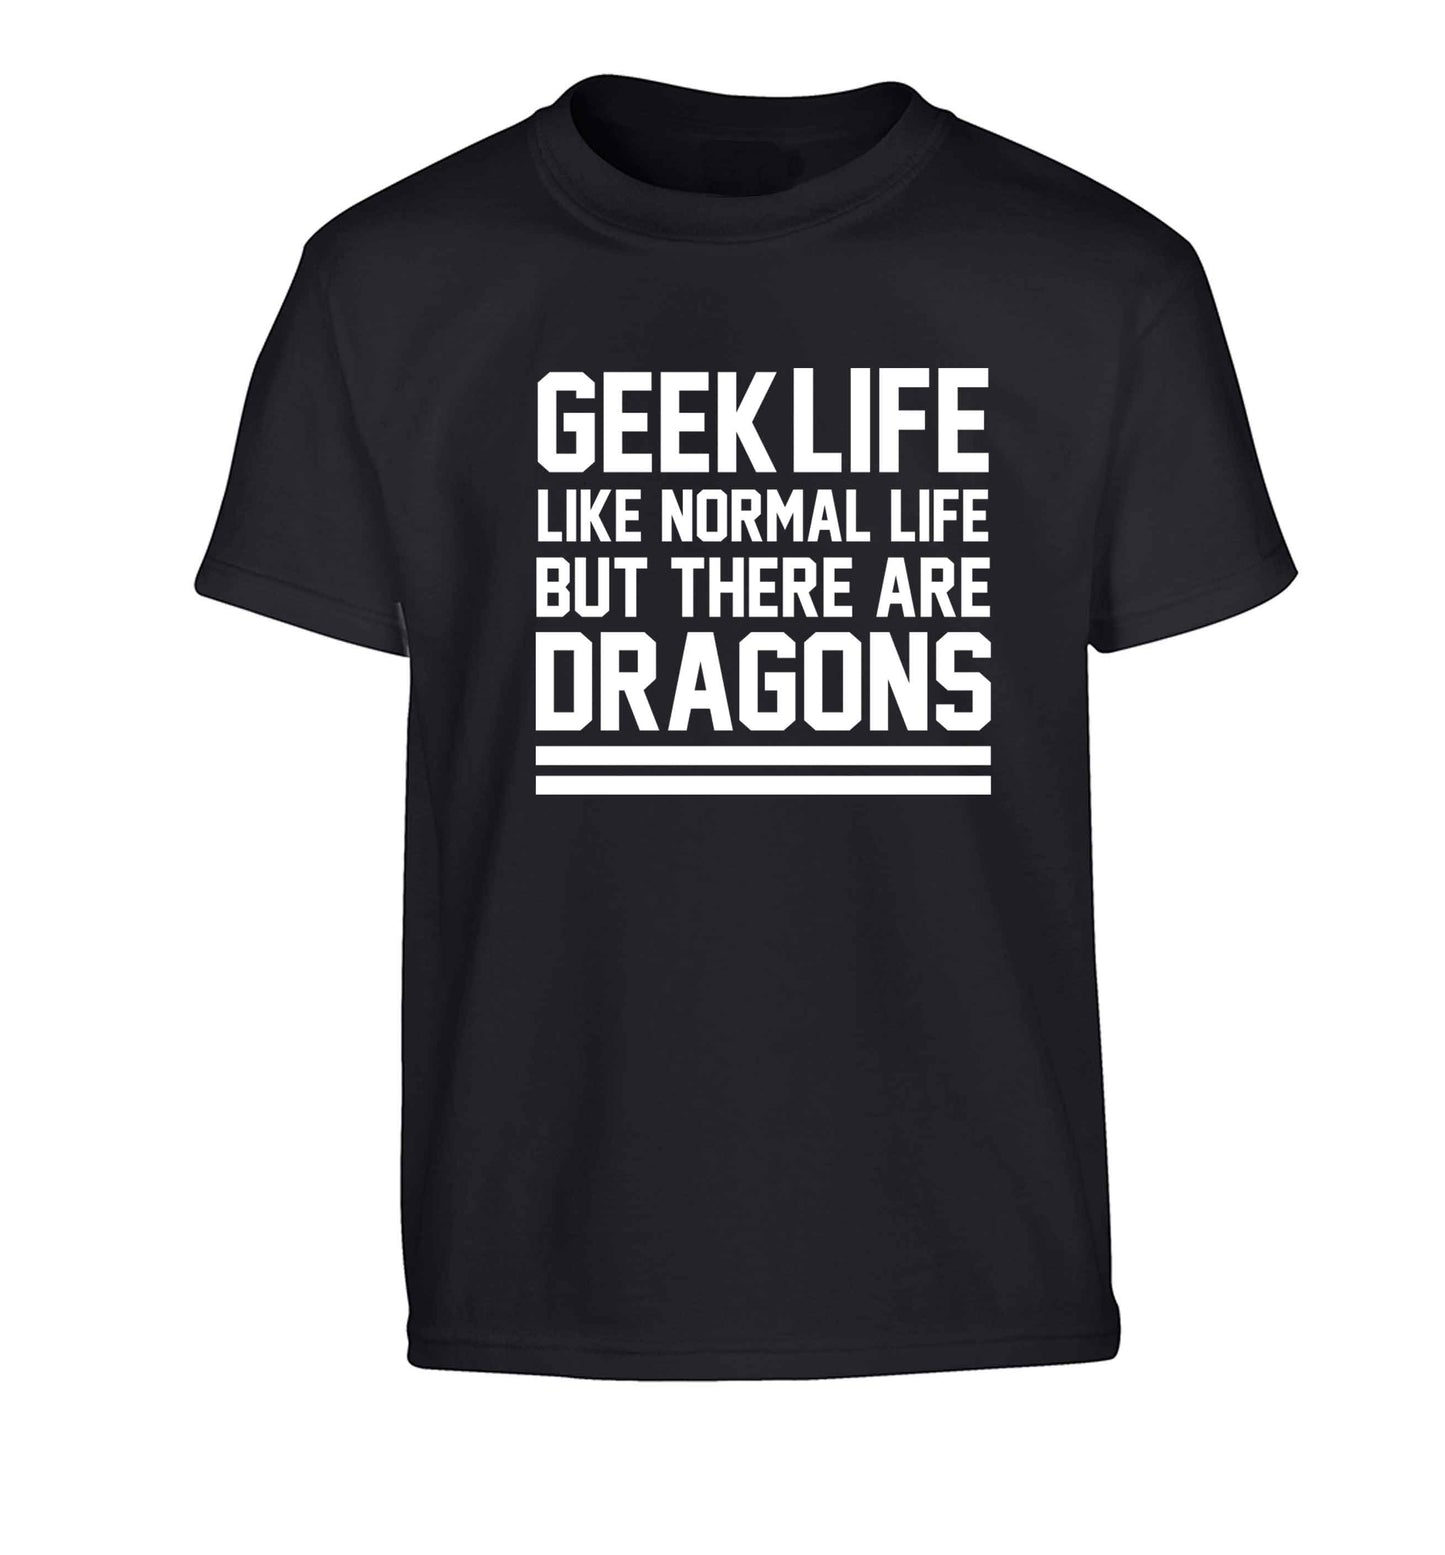 Geek life like normal life but there are dragons Children's black Tshirt 12-13 Years